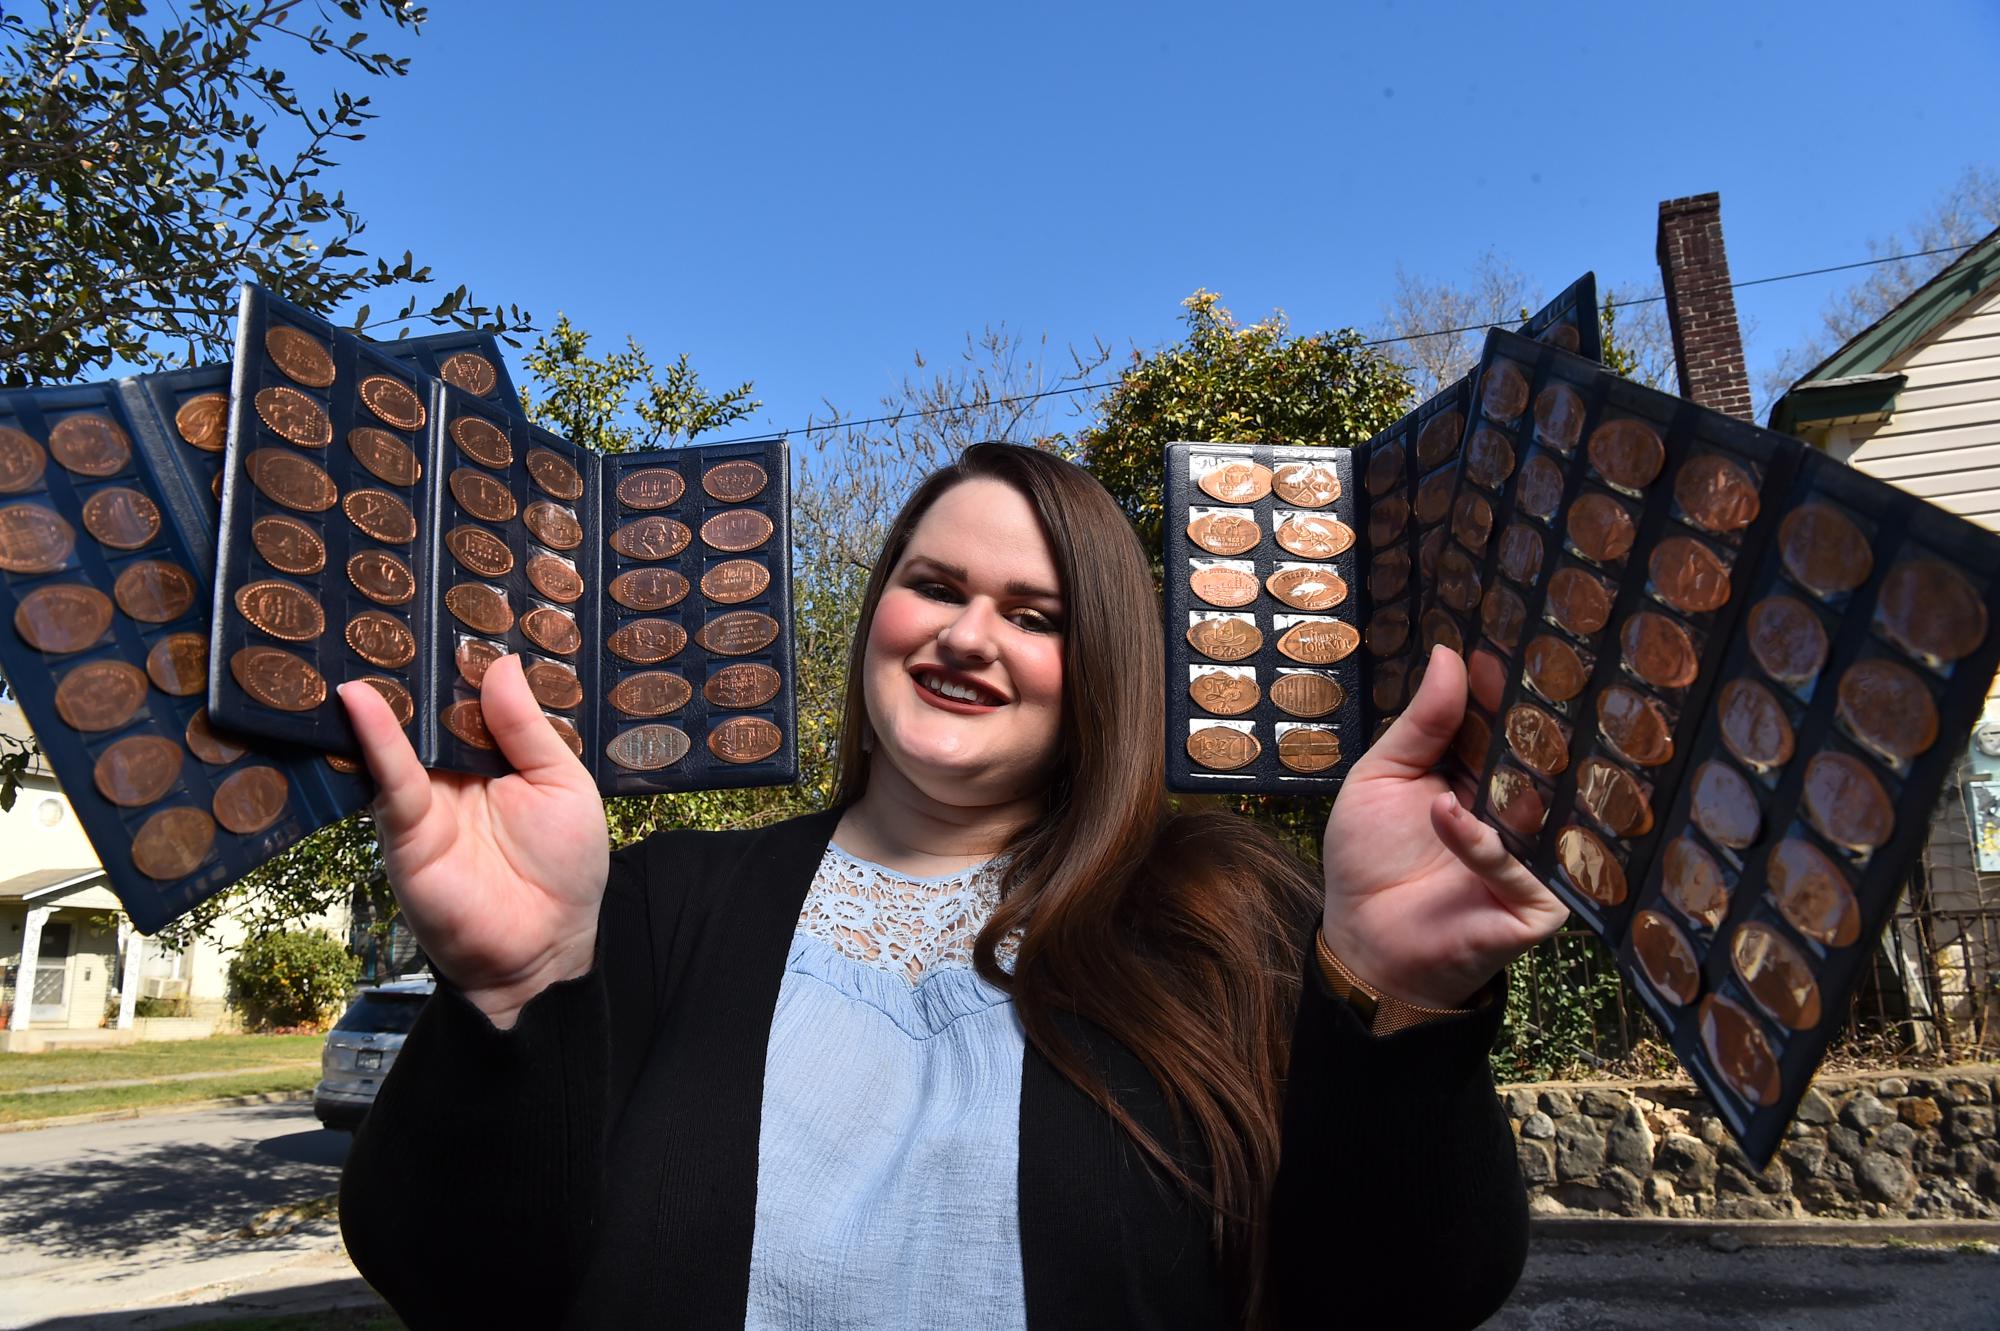 San Antonio marketing manager collects pressed pennies ...